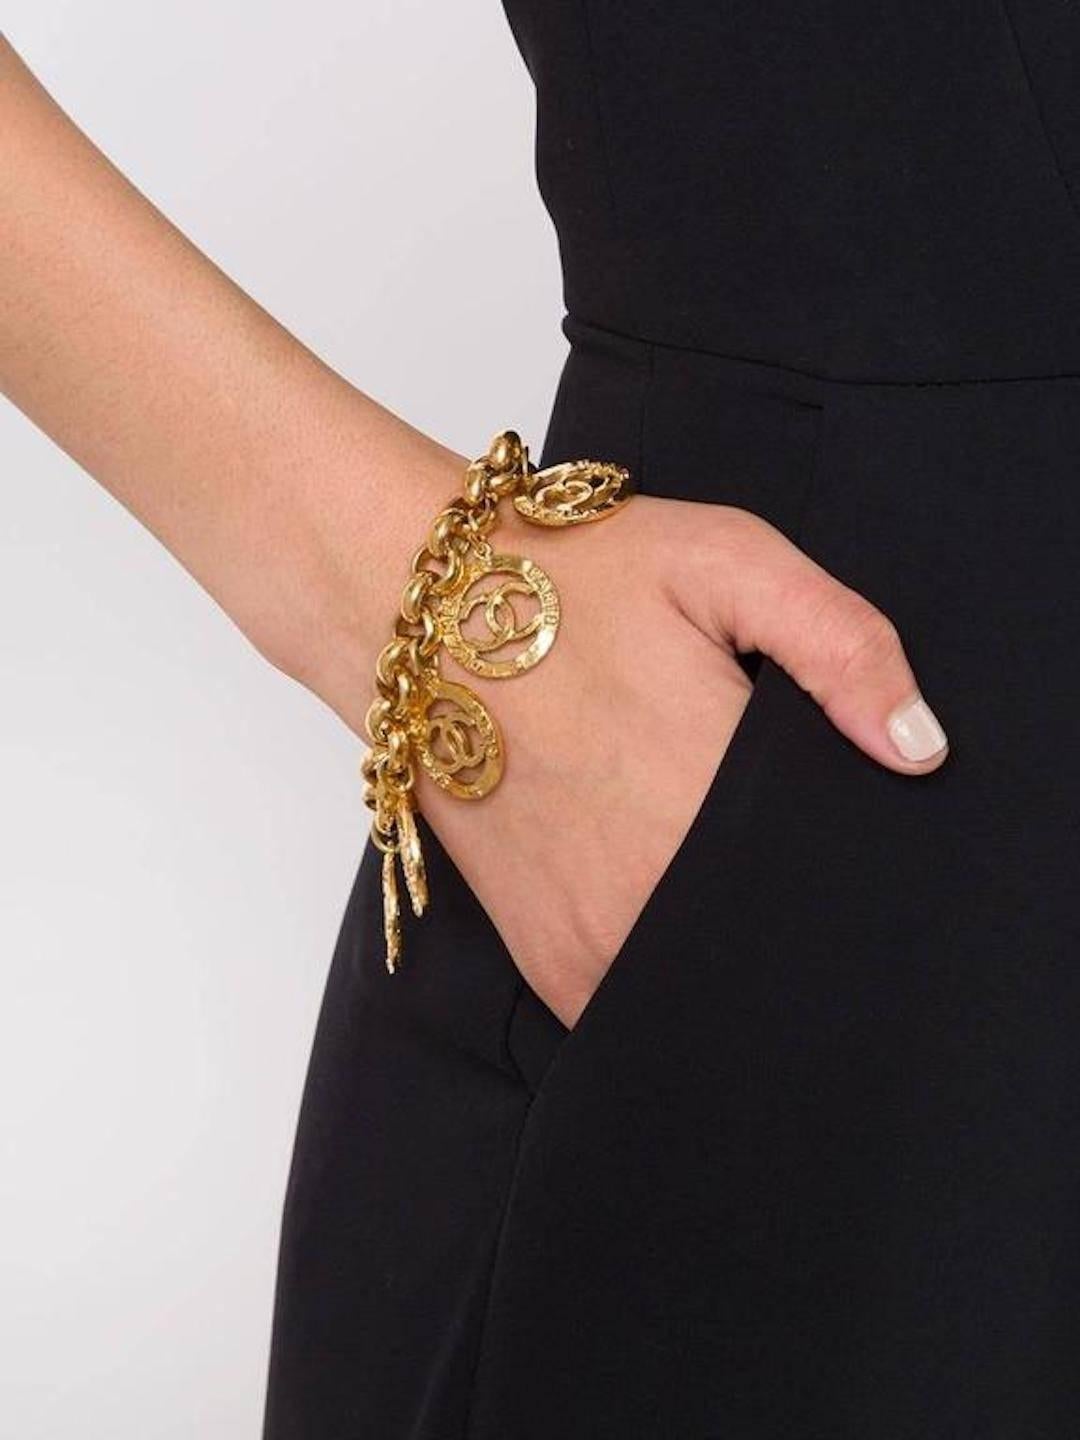 CURATOR'S NOTES  

Chanel Vintage Gold Medallion Coin CC Charms Chain Link Dangle Cuff Bracelet 

Metal 
Gold tone 
Lobster claw closure 
Made in France 
Total length 7.7" 
Charms measure 1" W x 1" H 